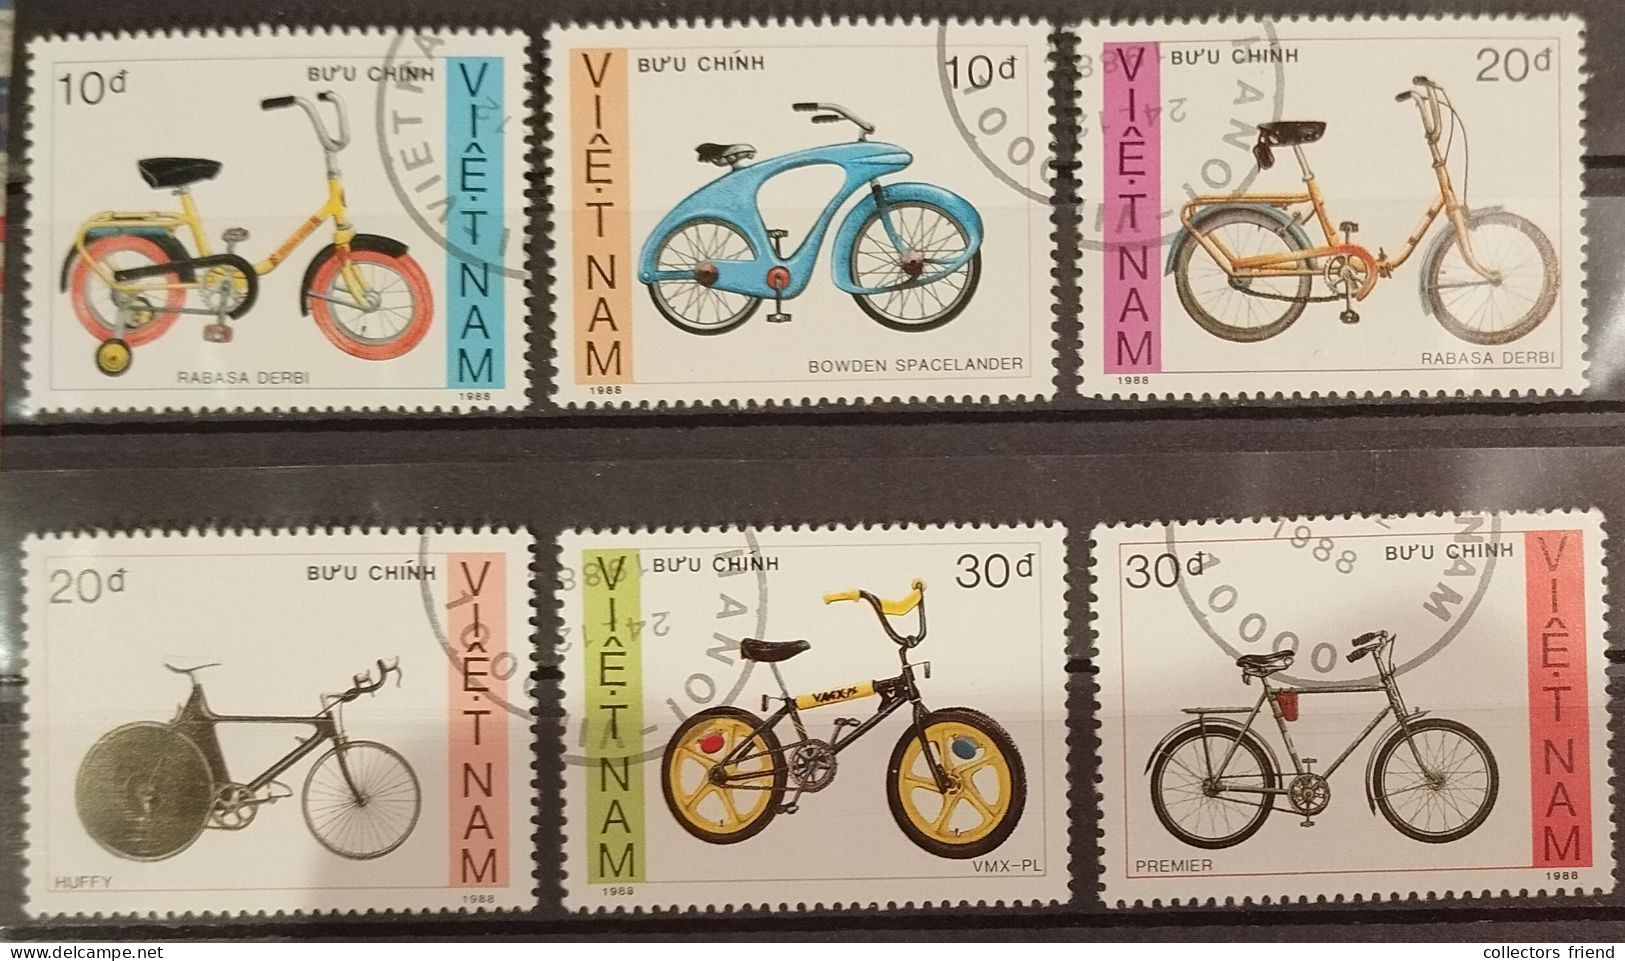 VIETNAM - 1988 - CYCLING BICYCLE - 5 Stamps -  Used - Ciclismo